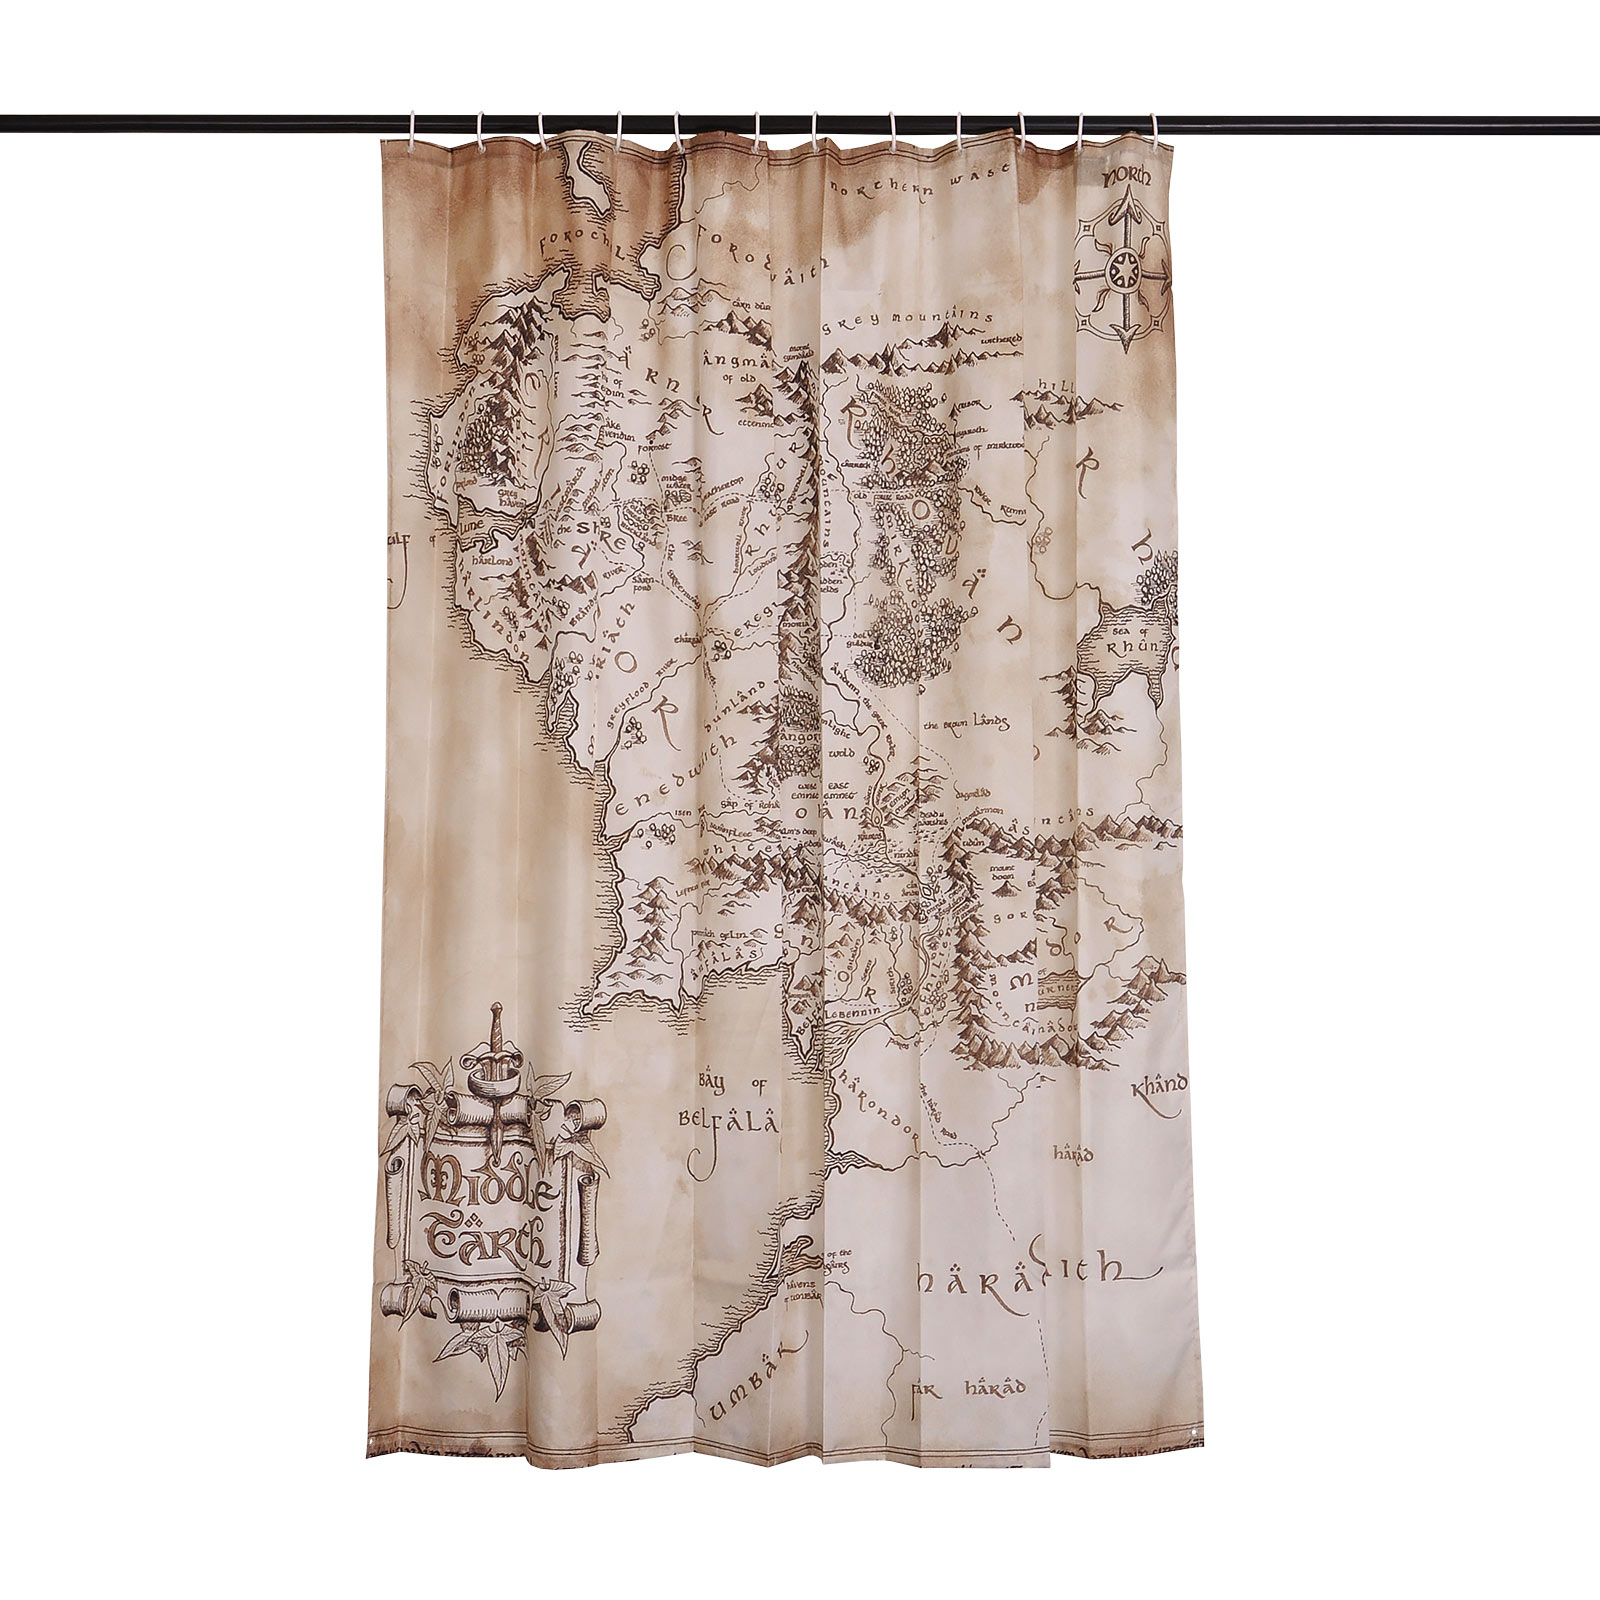 Lord of the Rings - Middle Earth Map Shower Curtain